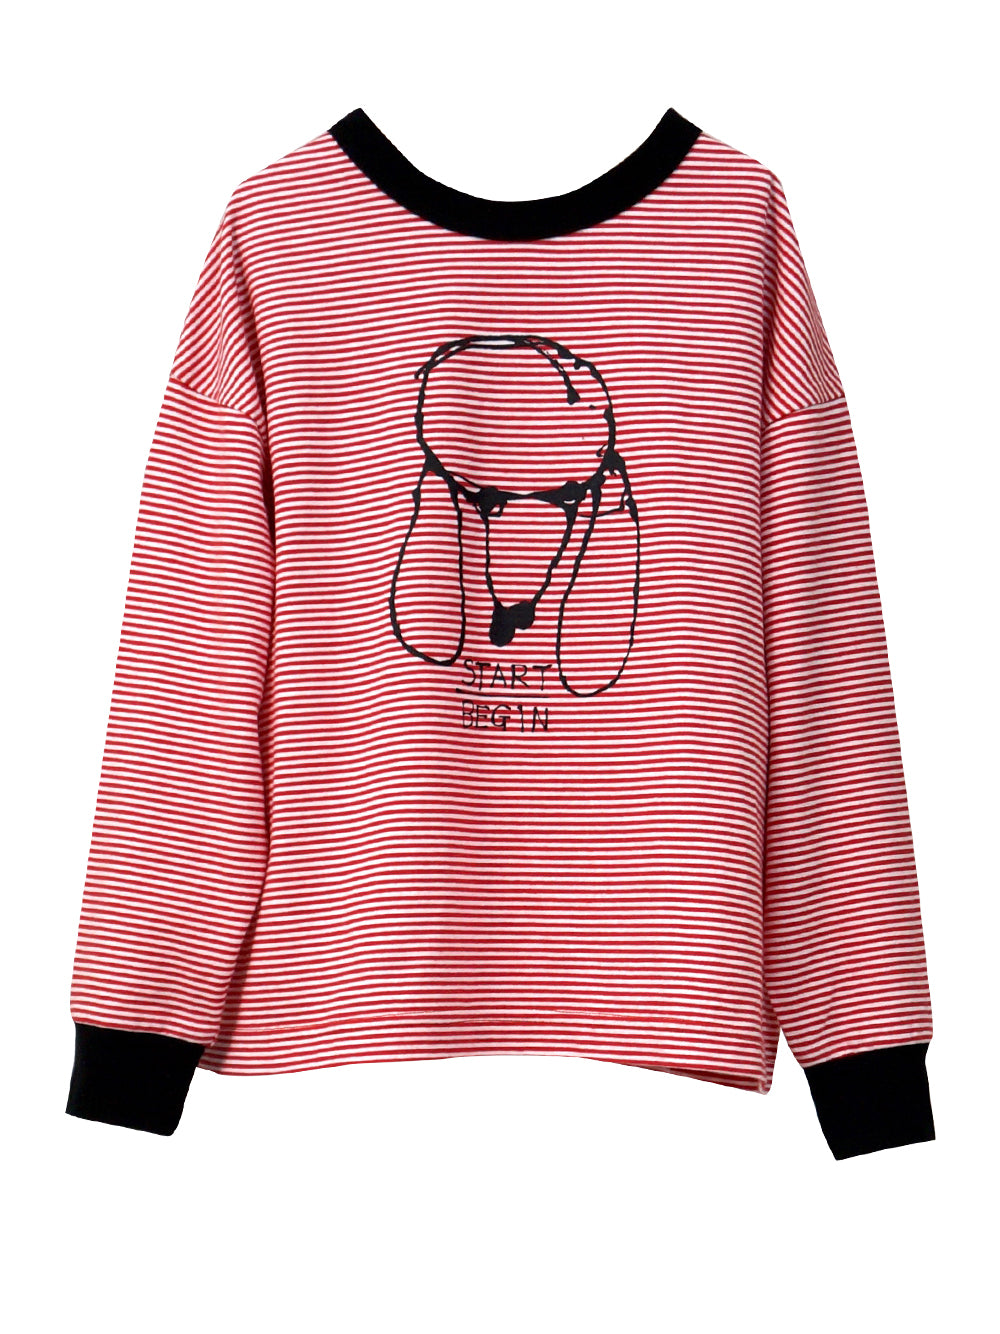 Red Striped Poodle Tee